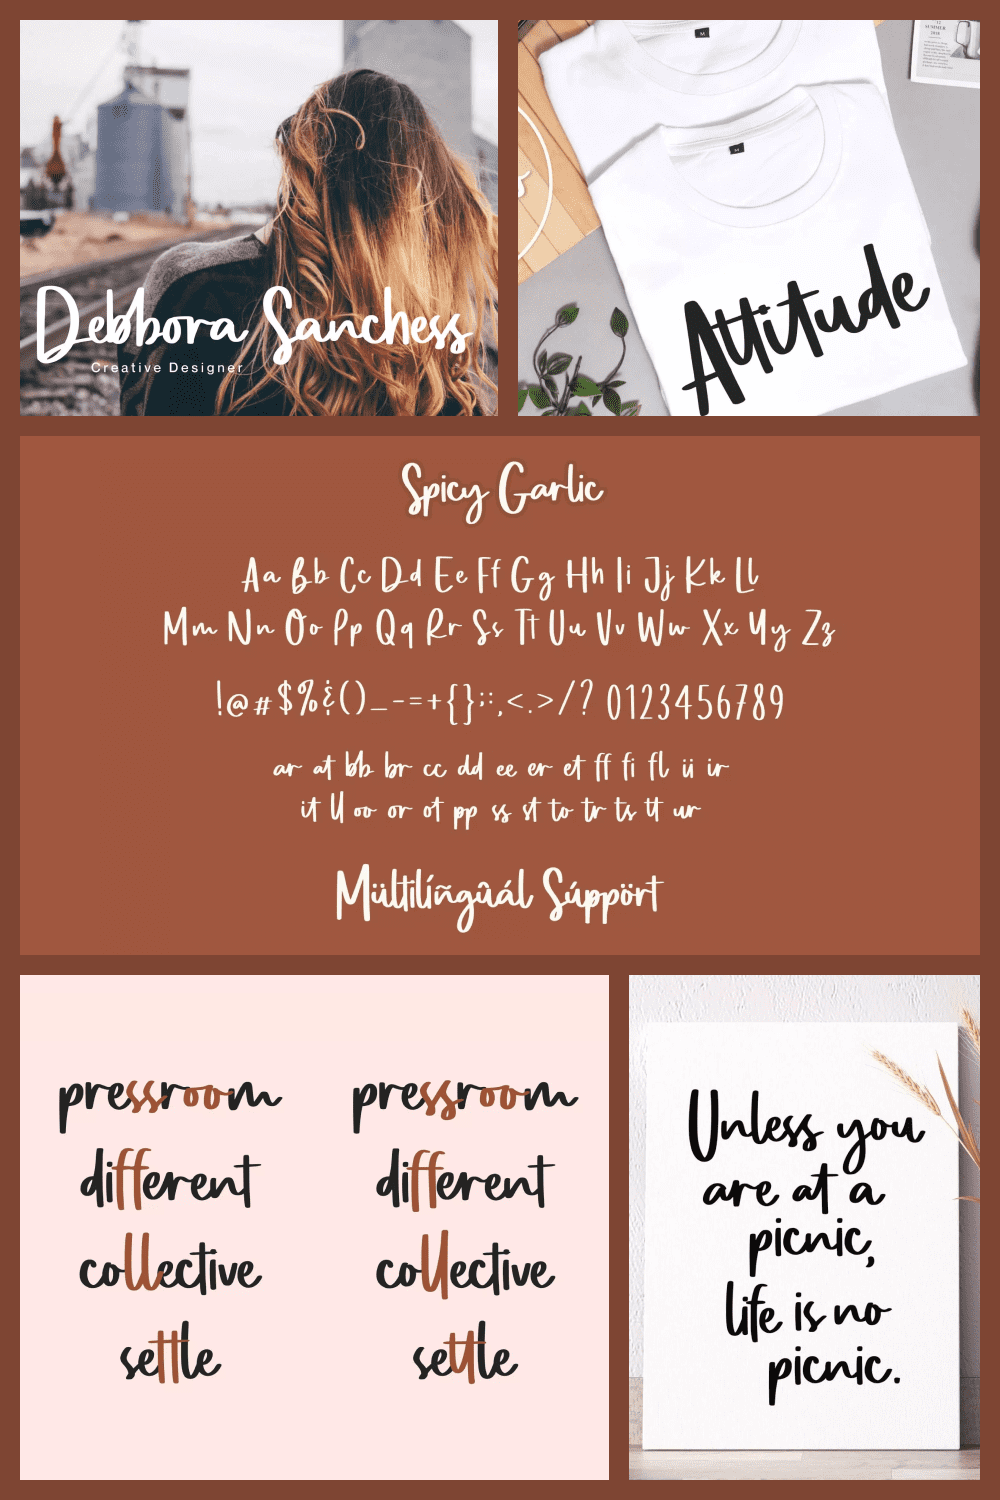 A collage of images of handwriting options on a poster and on a T-shirt.